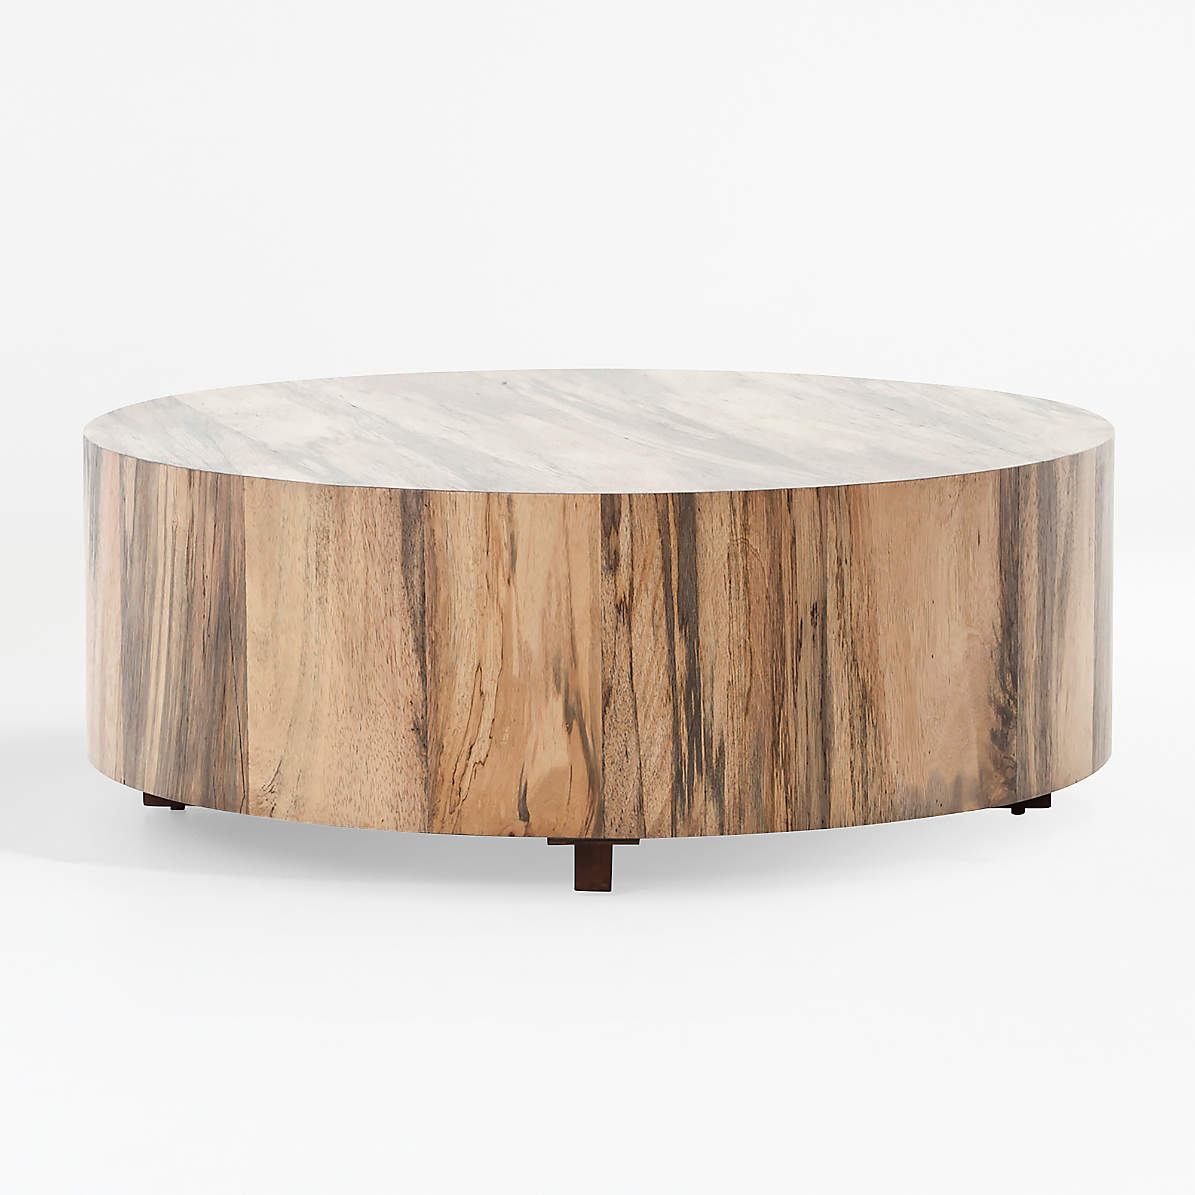 30 Round Wooden Coffee Table Round Nesting Mango Wood Coffee Table